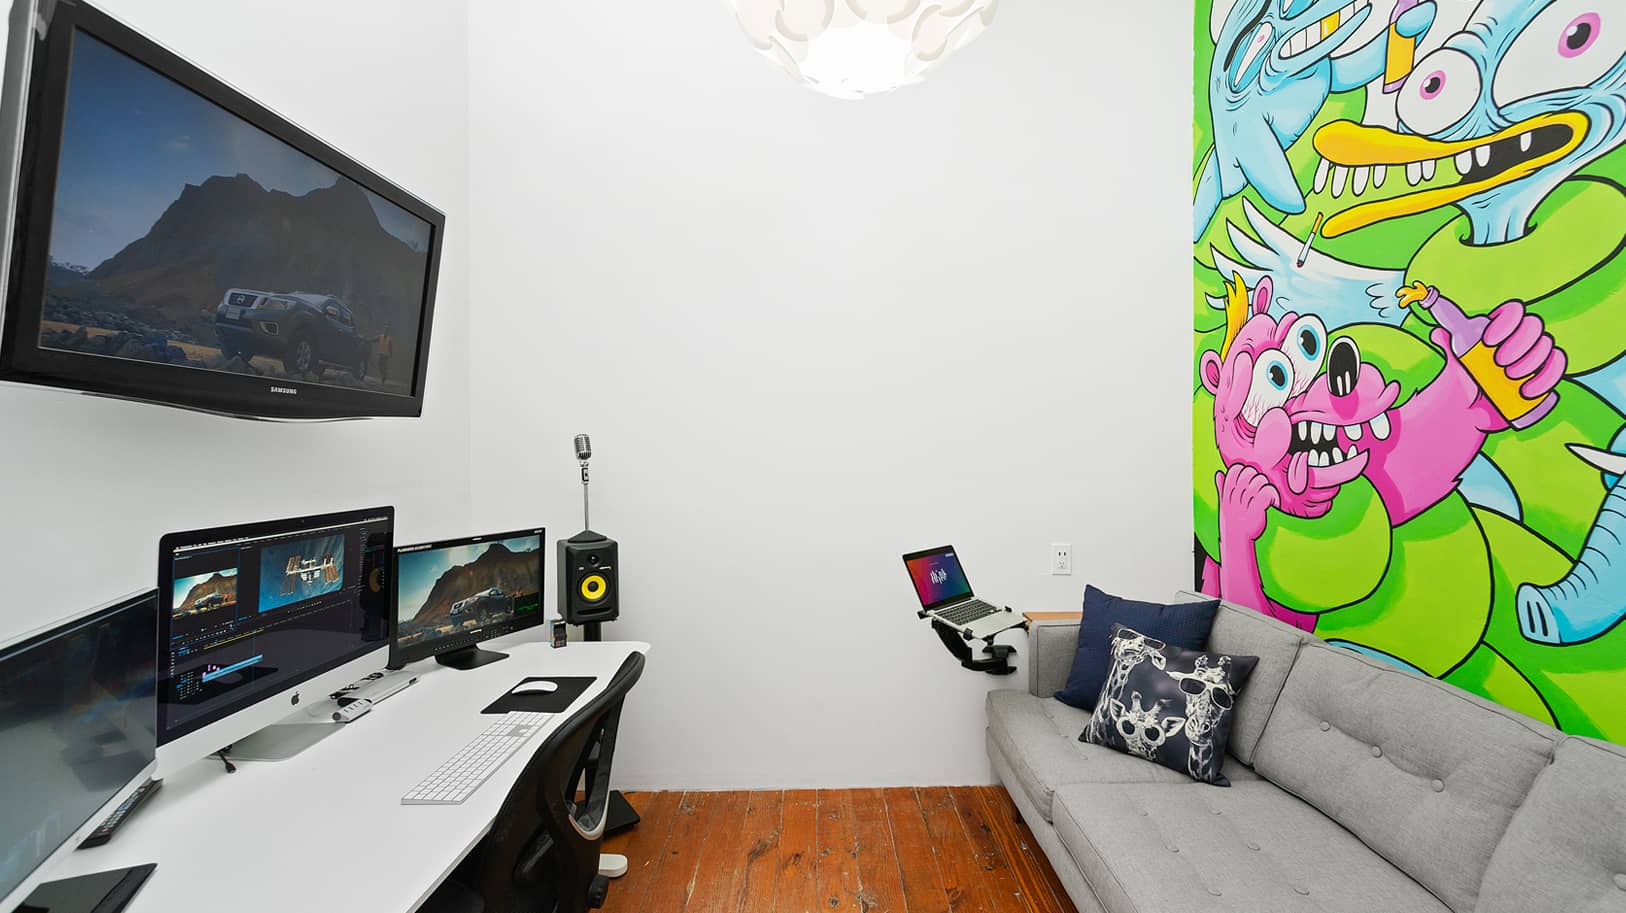 Post-production suite equipment in front of sofa and grafitti-painted wall | Think Twice studio